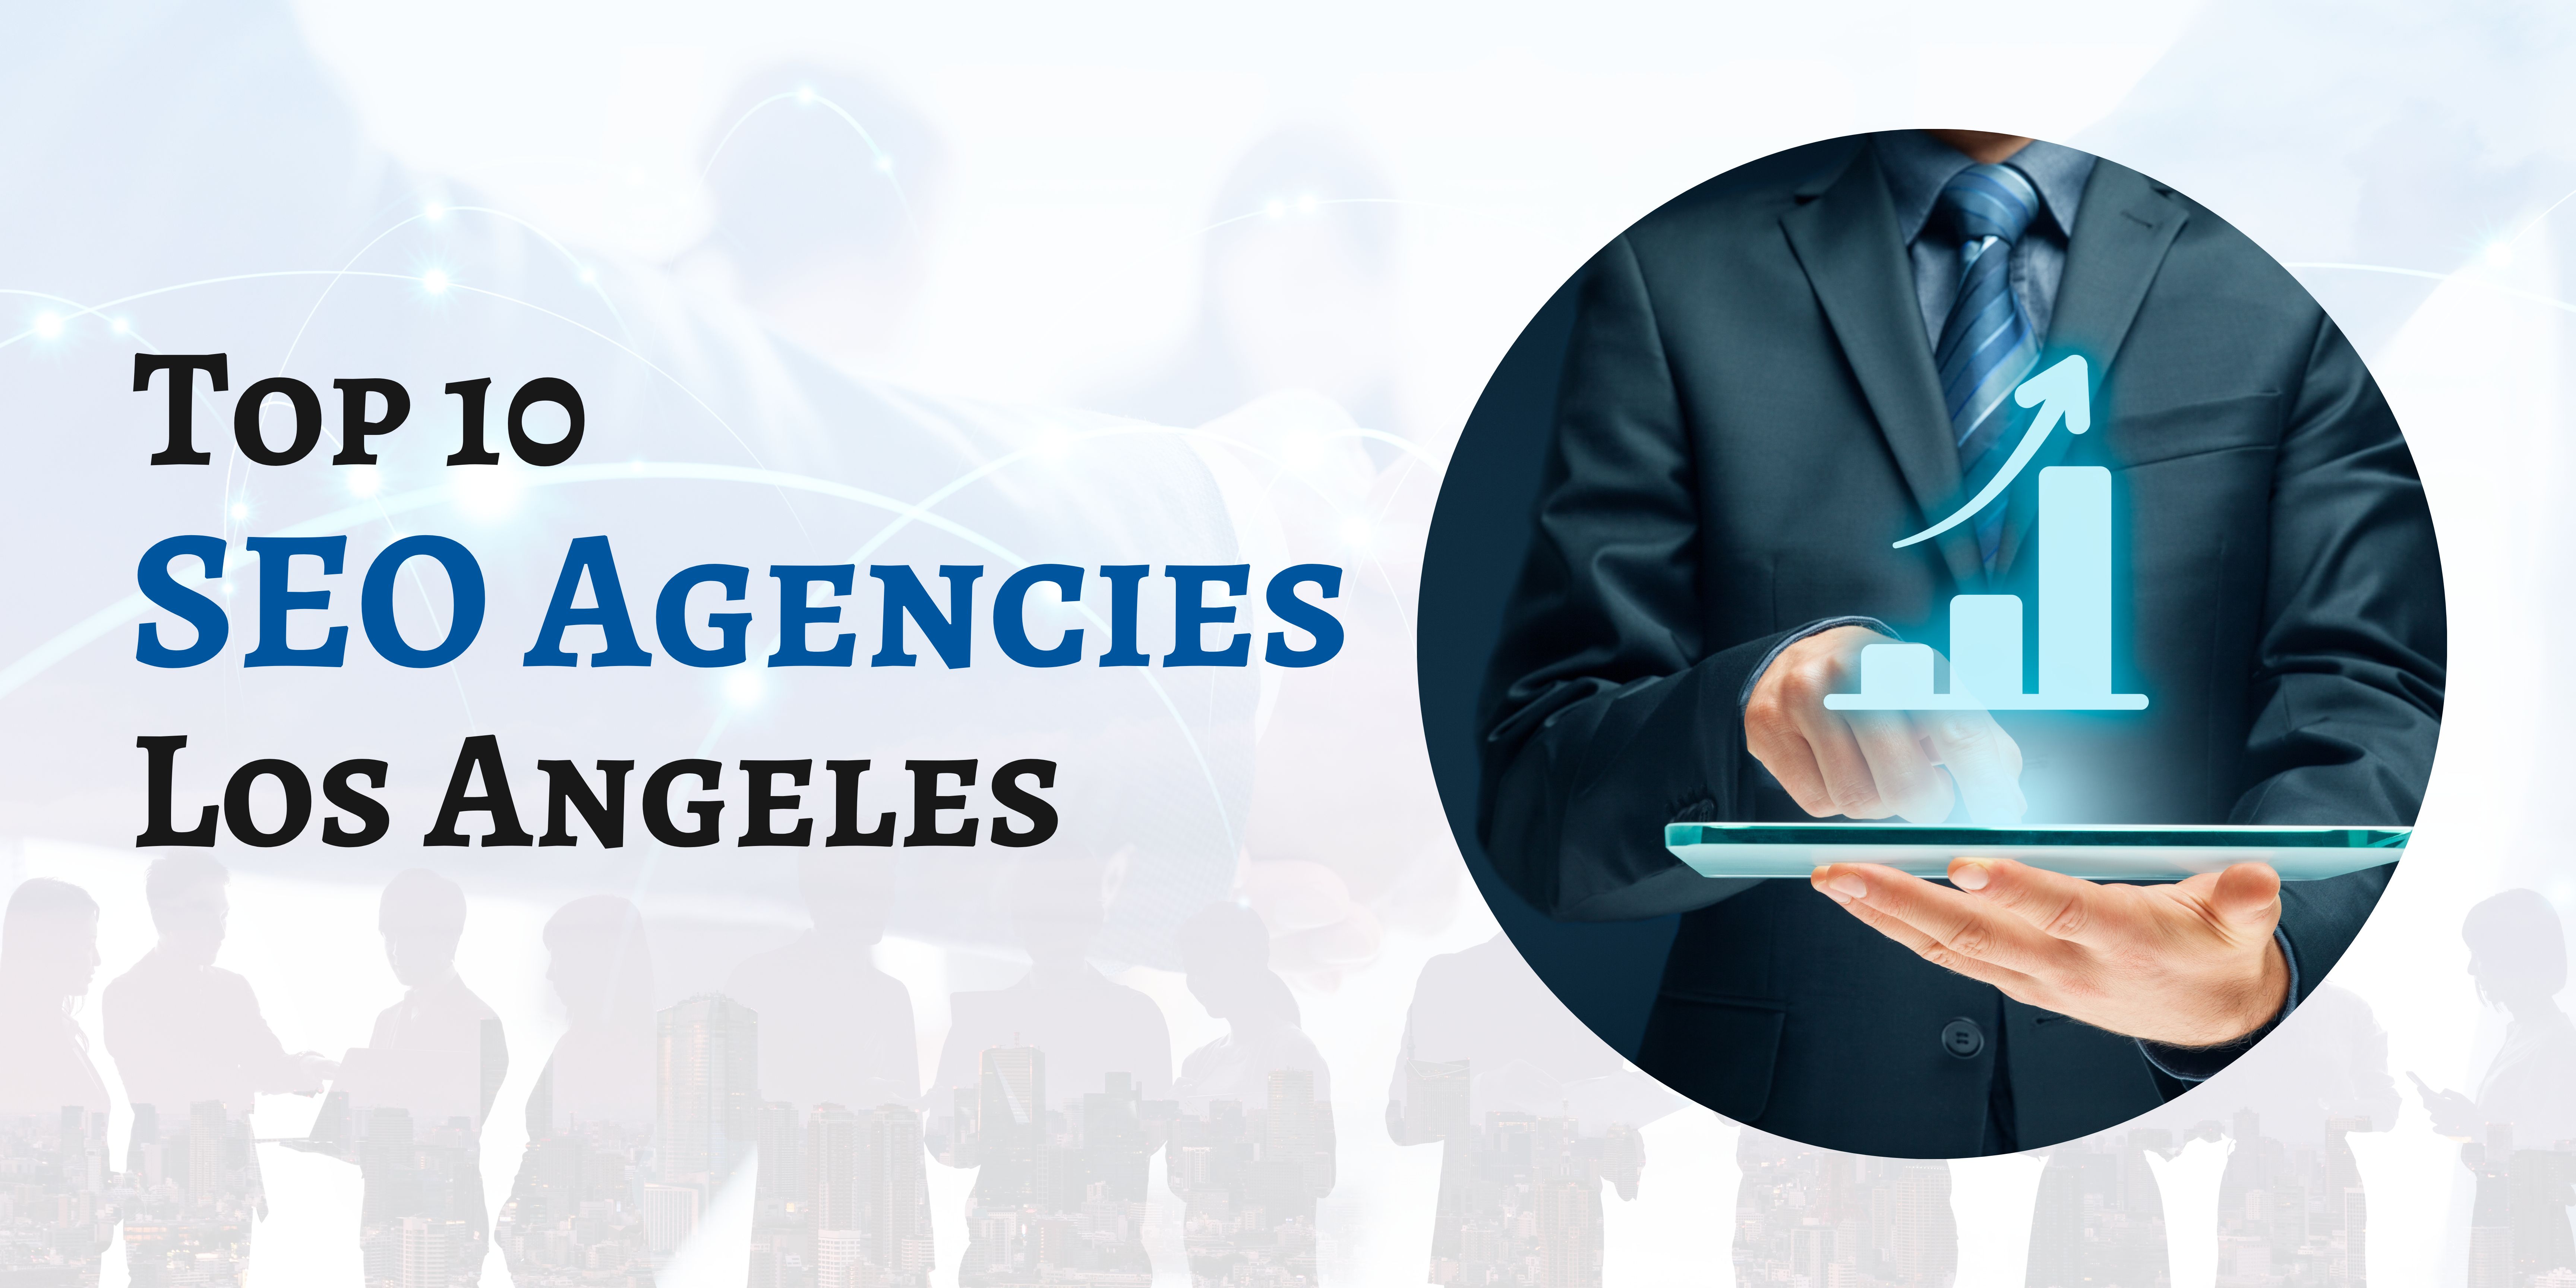 You are currently viewing Top 10 SEO Agencies in Los Angeles